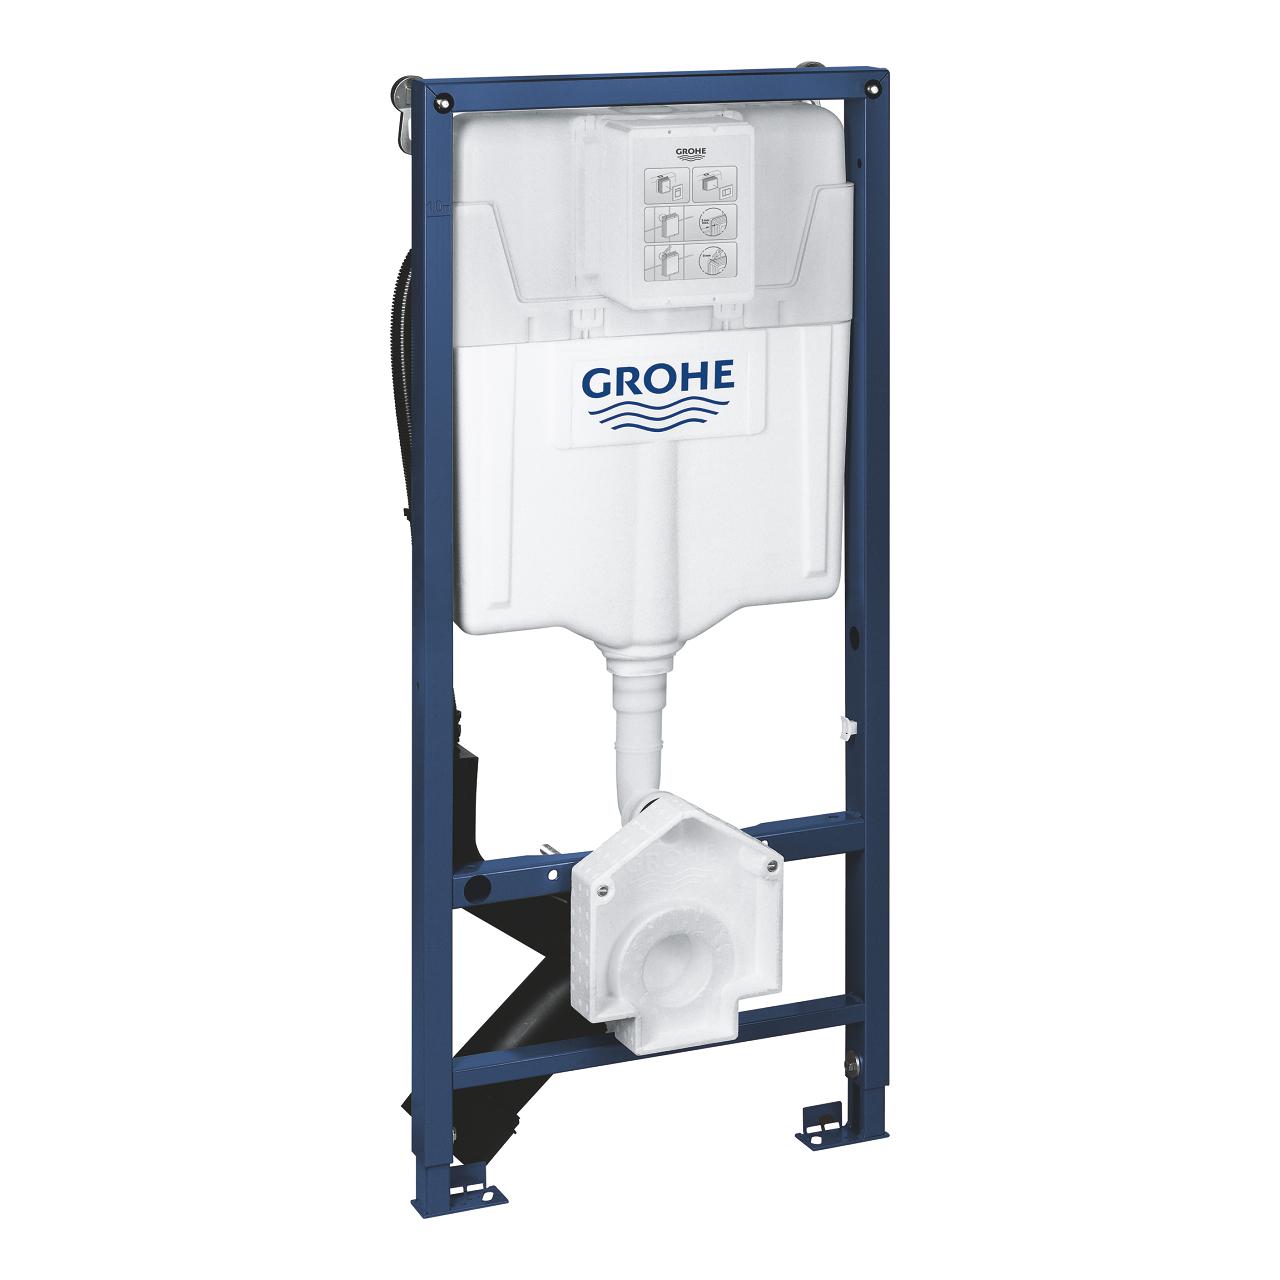 Grohe 38536001 Rapid SL Element for Toilet, 1,13M Installation Height